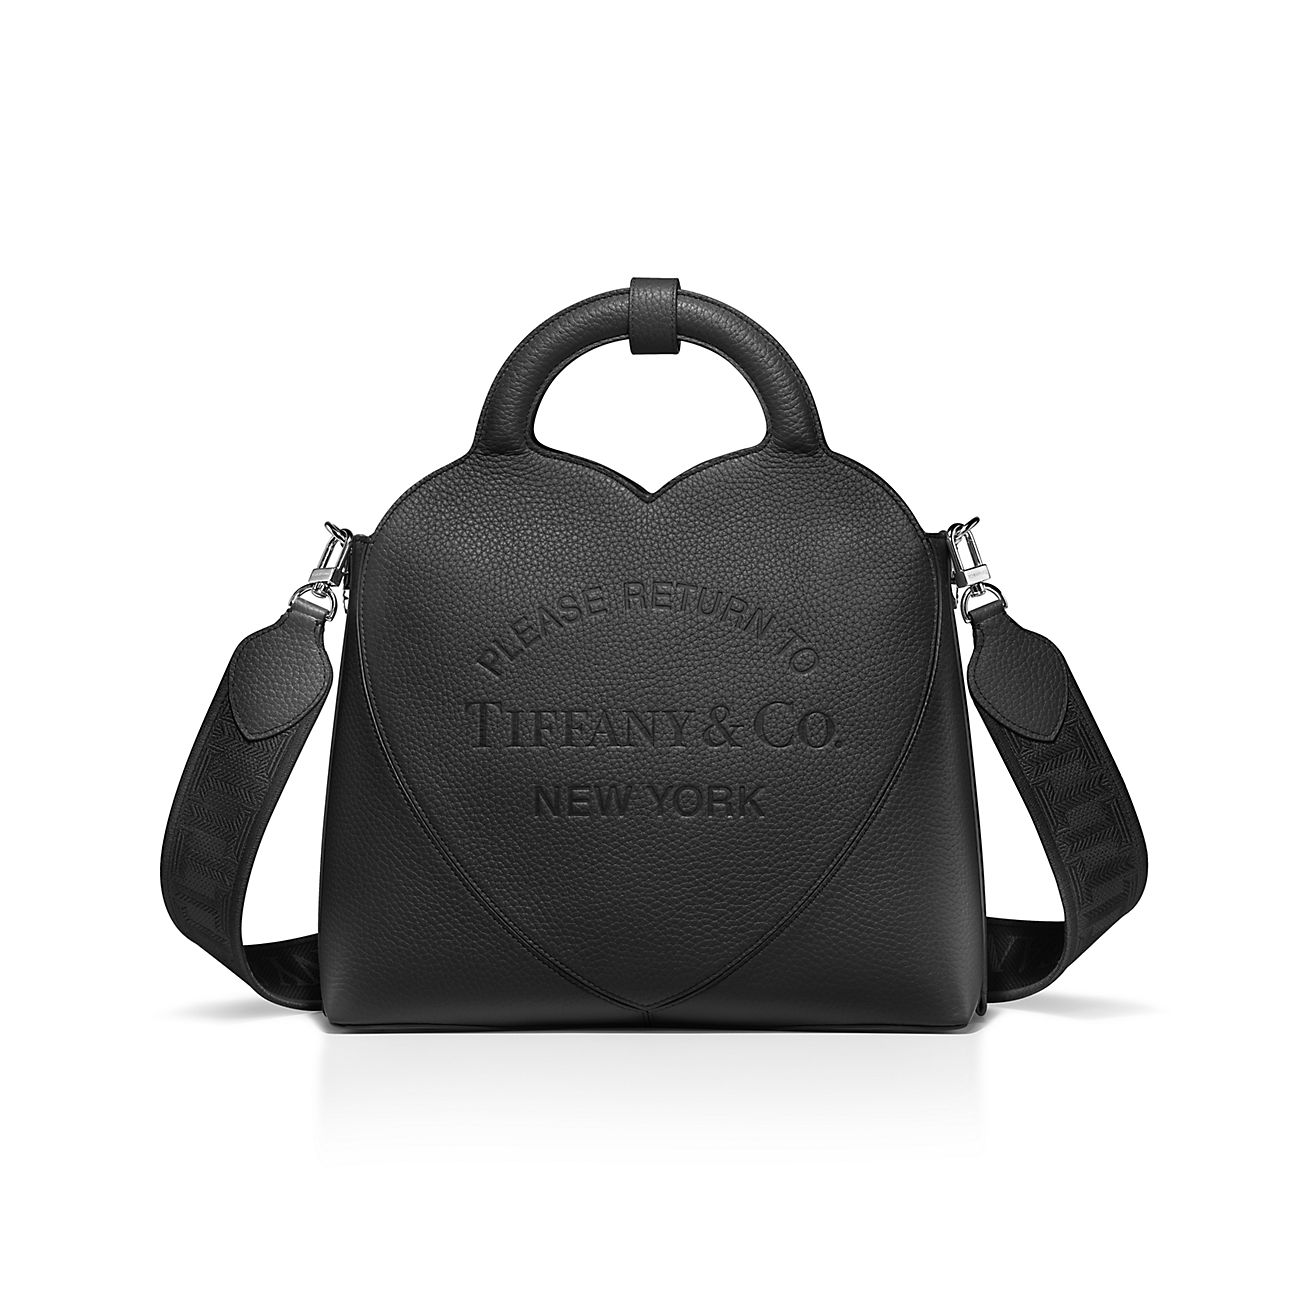 Small Harmony Black Leather Tote: Purse that Charges Phone